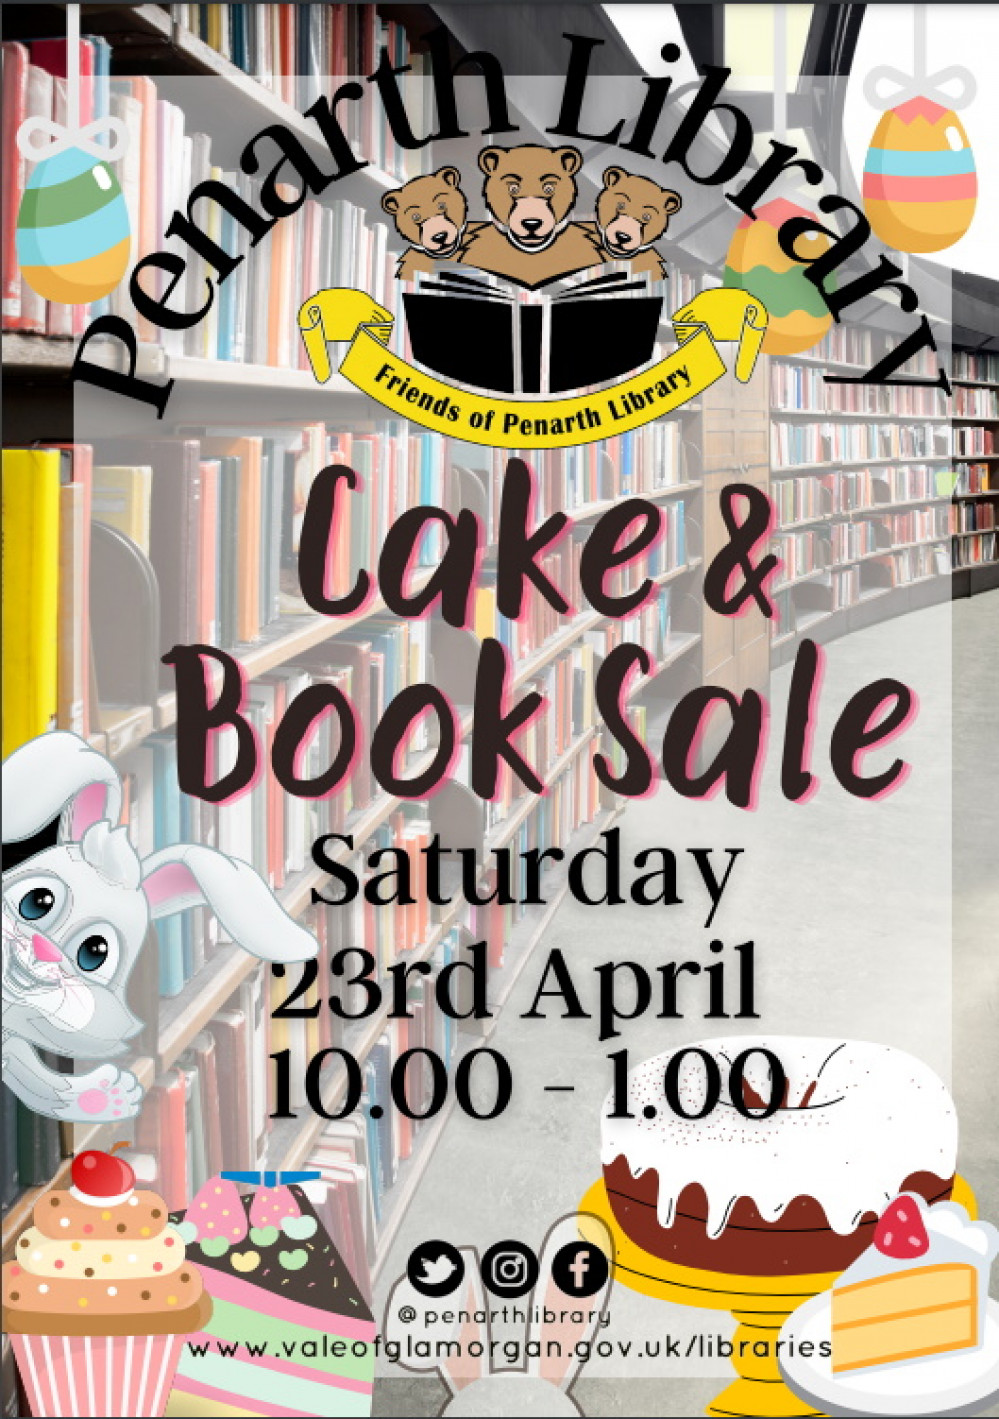 Friends of Penarth Library are holding a Cake and Book Sale. (Image credit: Friends of Penarth Library)